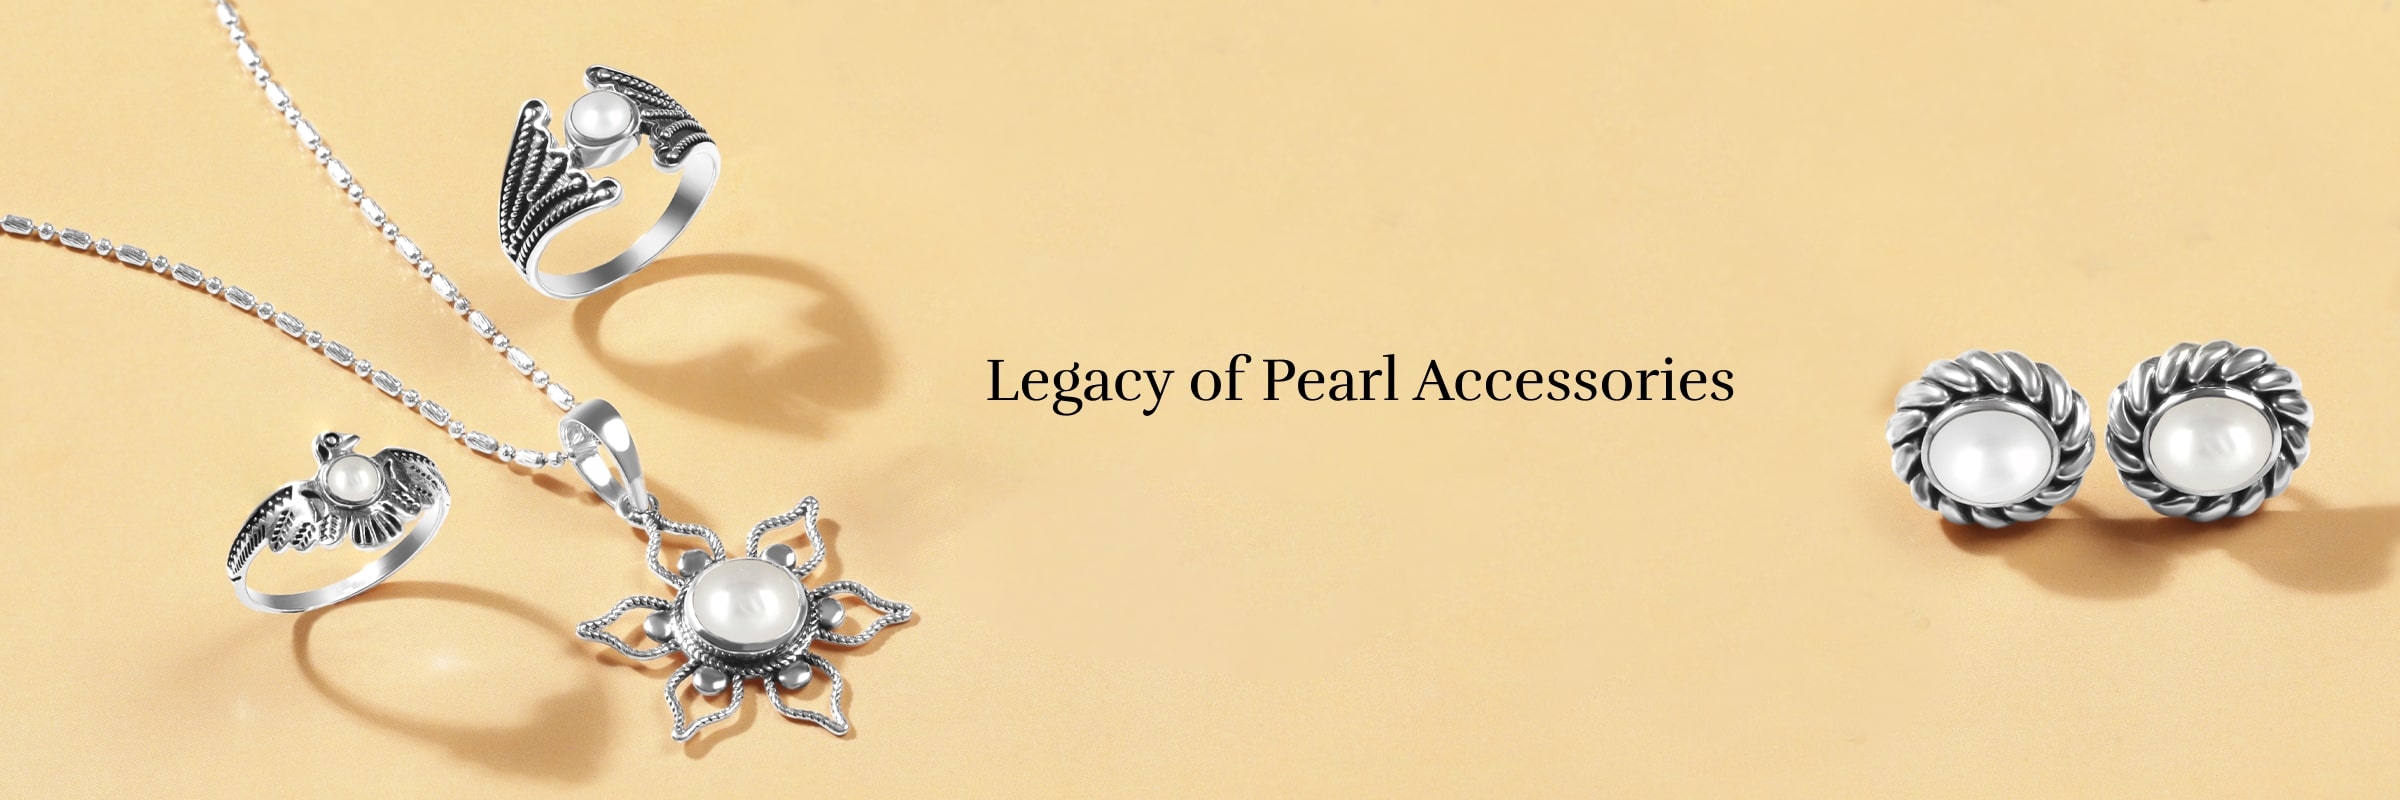 History of Pearl Jewelry